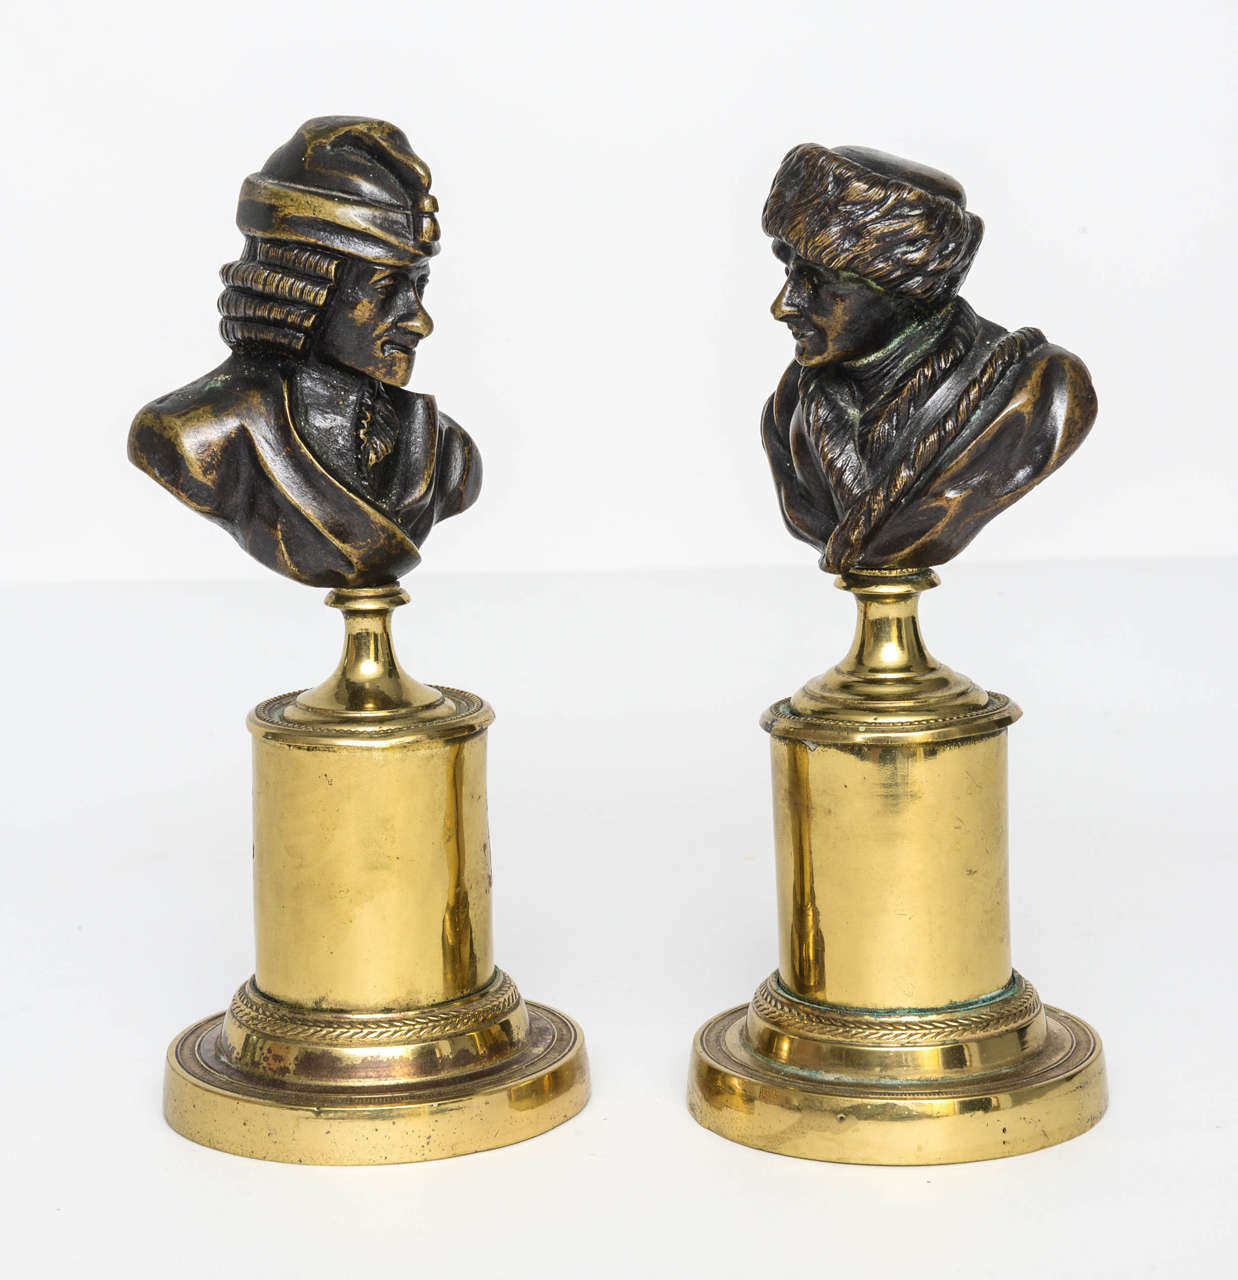 These busts of Jean Jacques Rousseau and François-Marie Arouet, known by his nom de plume Voltaire, were writers and philosophers of the French Enlightenment.